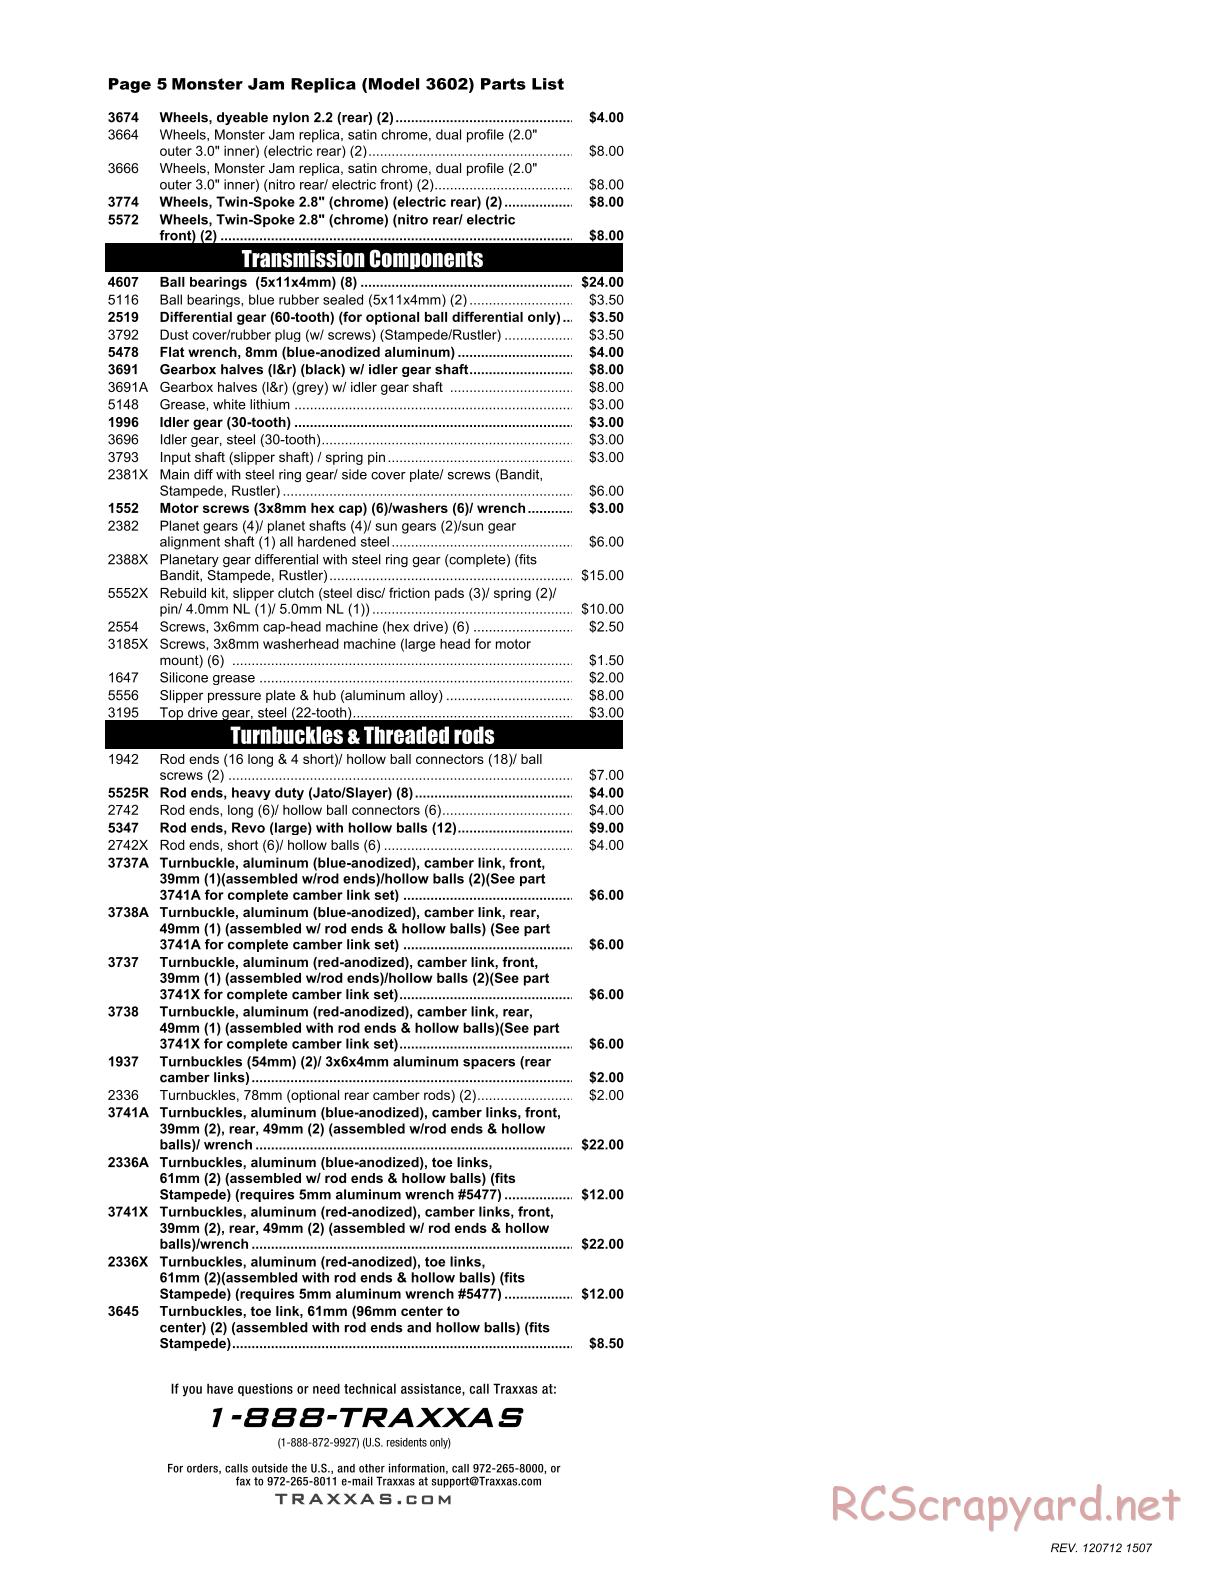 Traxxas - Monster Jam - Parts List - Page 5